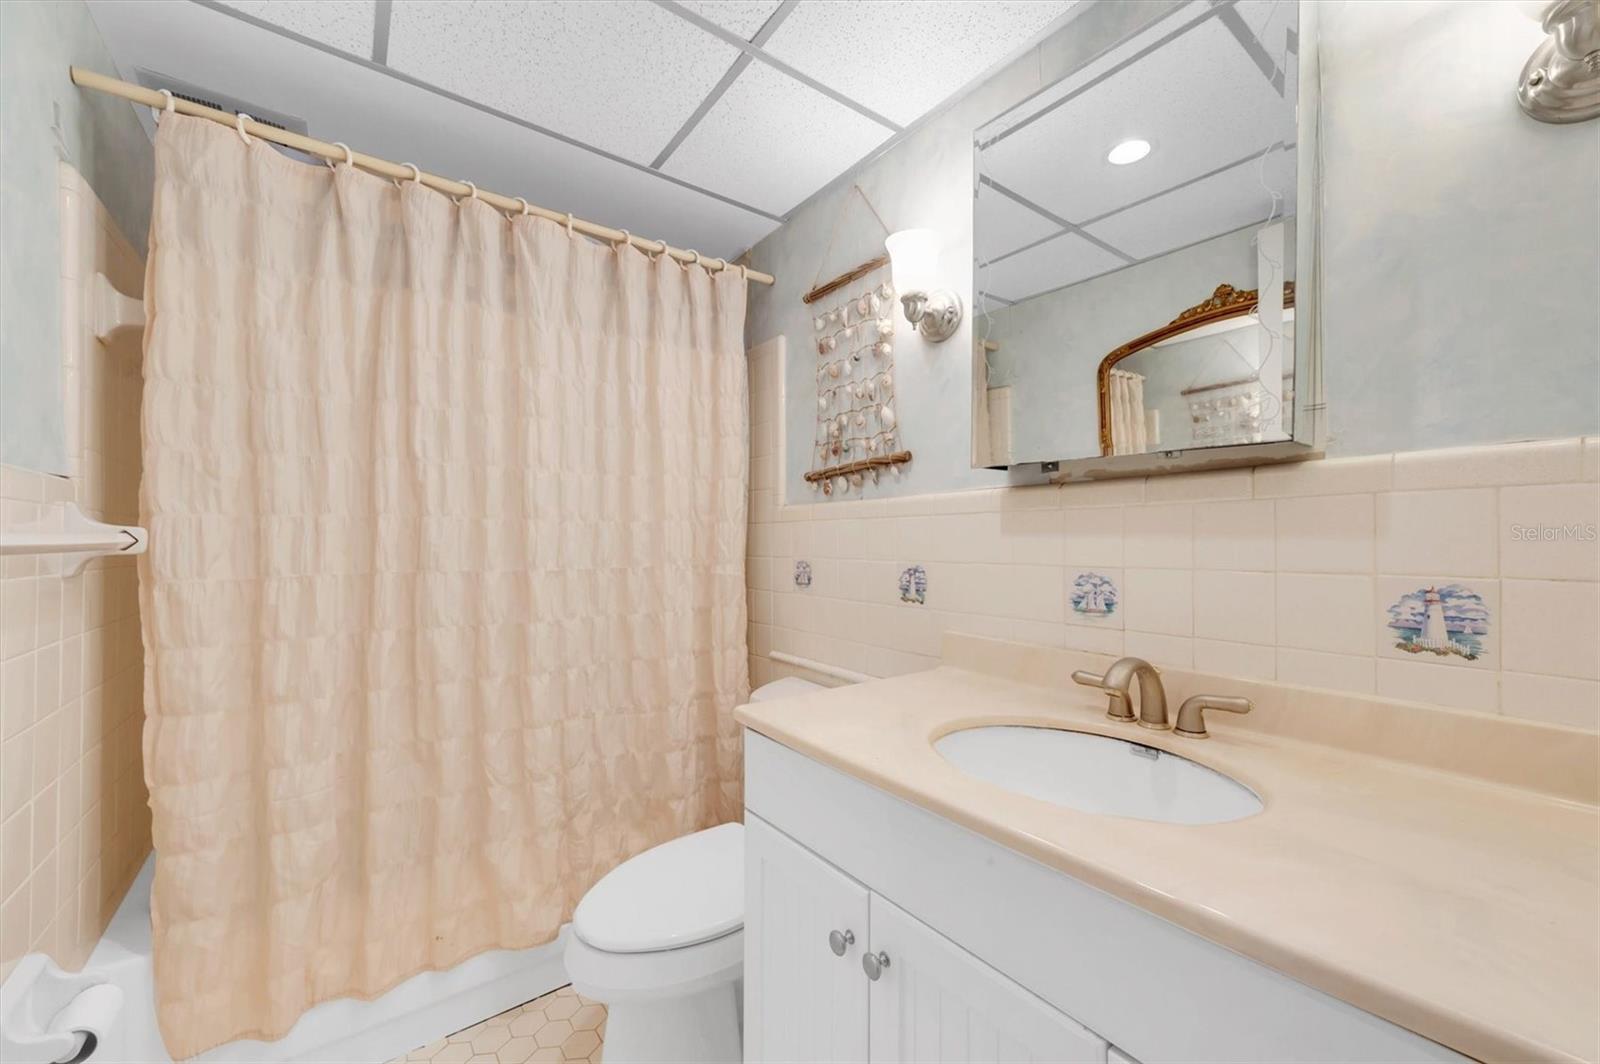 Bathroom is clean and bright with good storage, medicine cabinet and more room in the newer vanity.